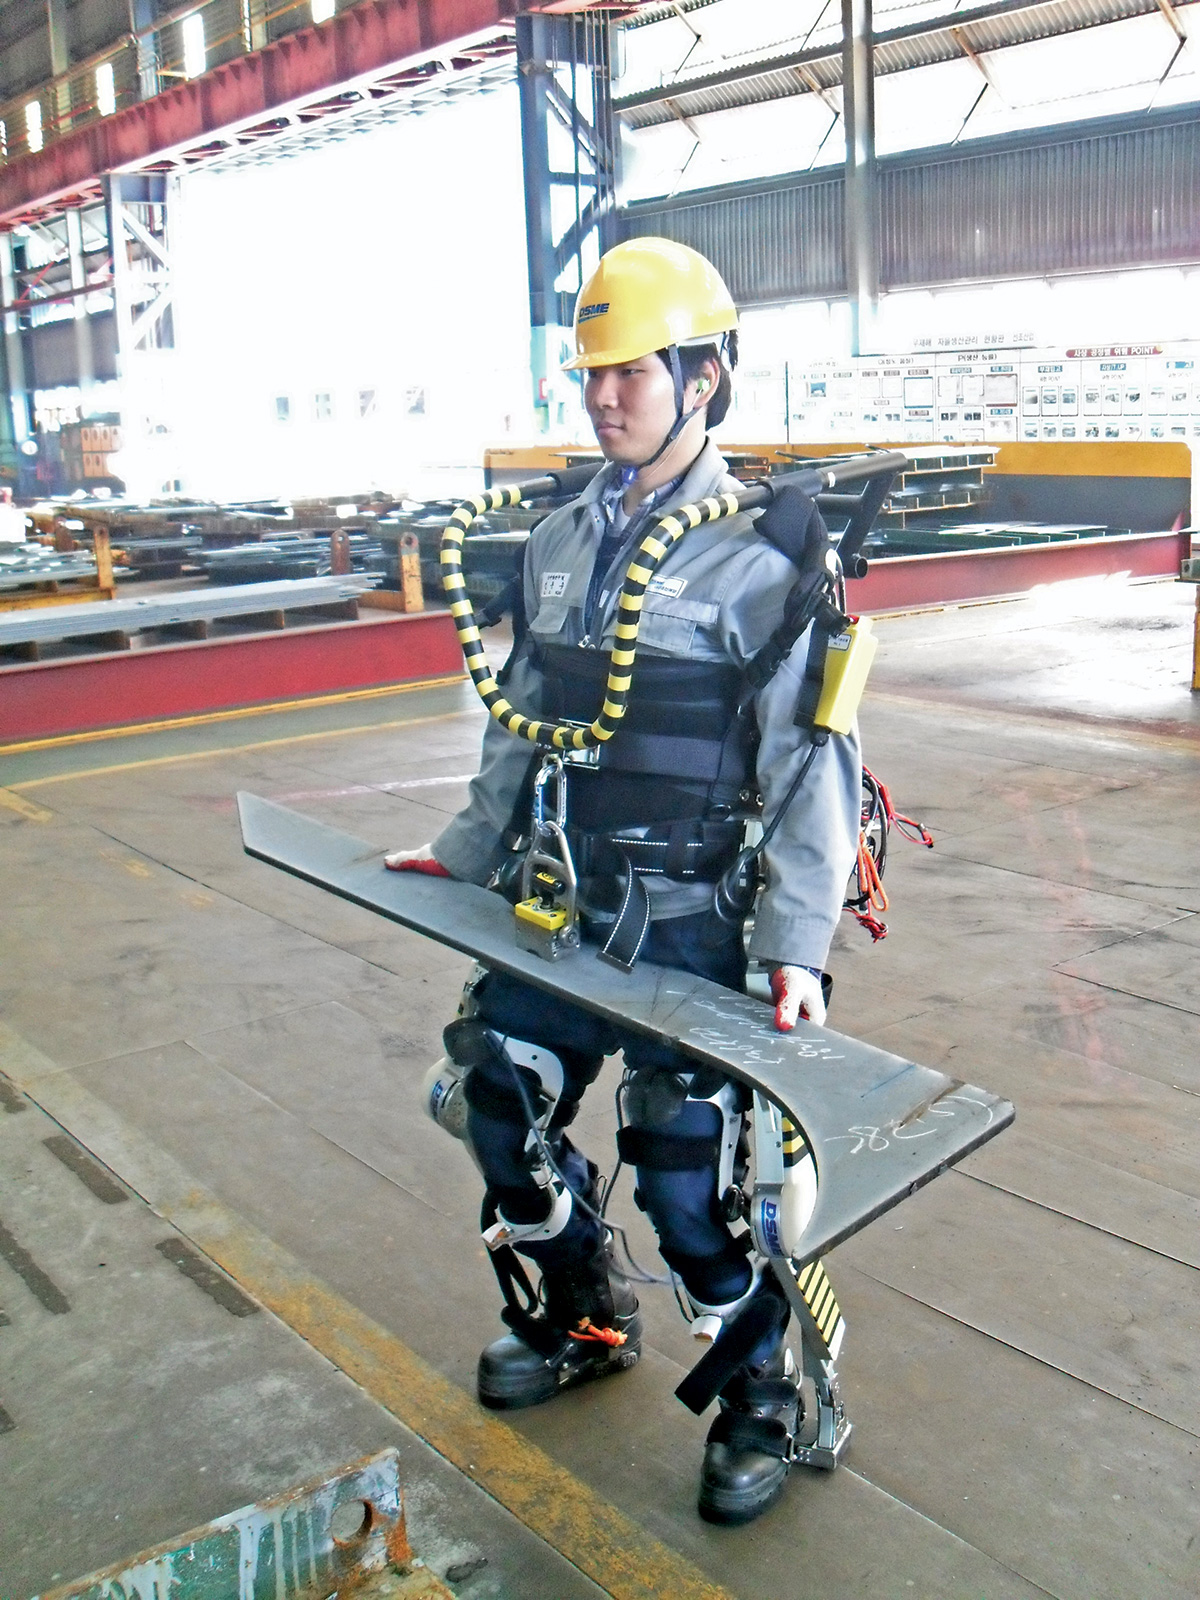 The exoskeleton fits anyone between 160 and 185 centimetres tall. Workers do not feel the weight of its 28-kilogram frame of carbon, aluminium alloy and steel, as the suit supports itself and is engineered to follow the wearer’s movements. With a 3-hour battery life, the exoskeleton allows users to walk at a normal pace and, in its prototype form, it can lift objects with a mass of up to 30 kilograms.